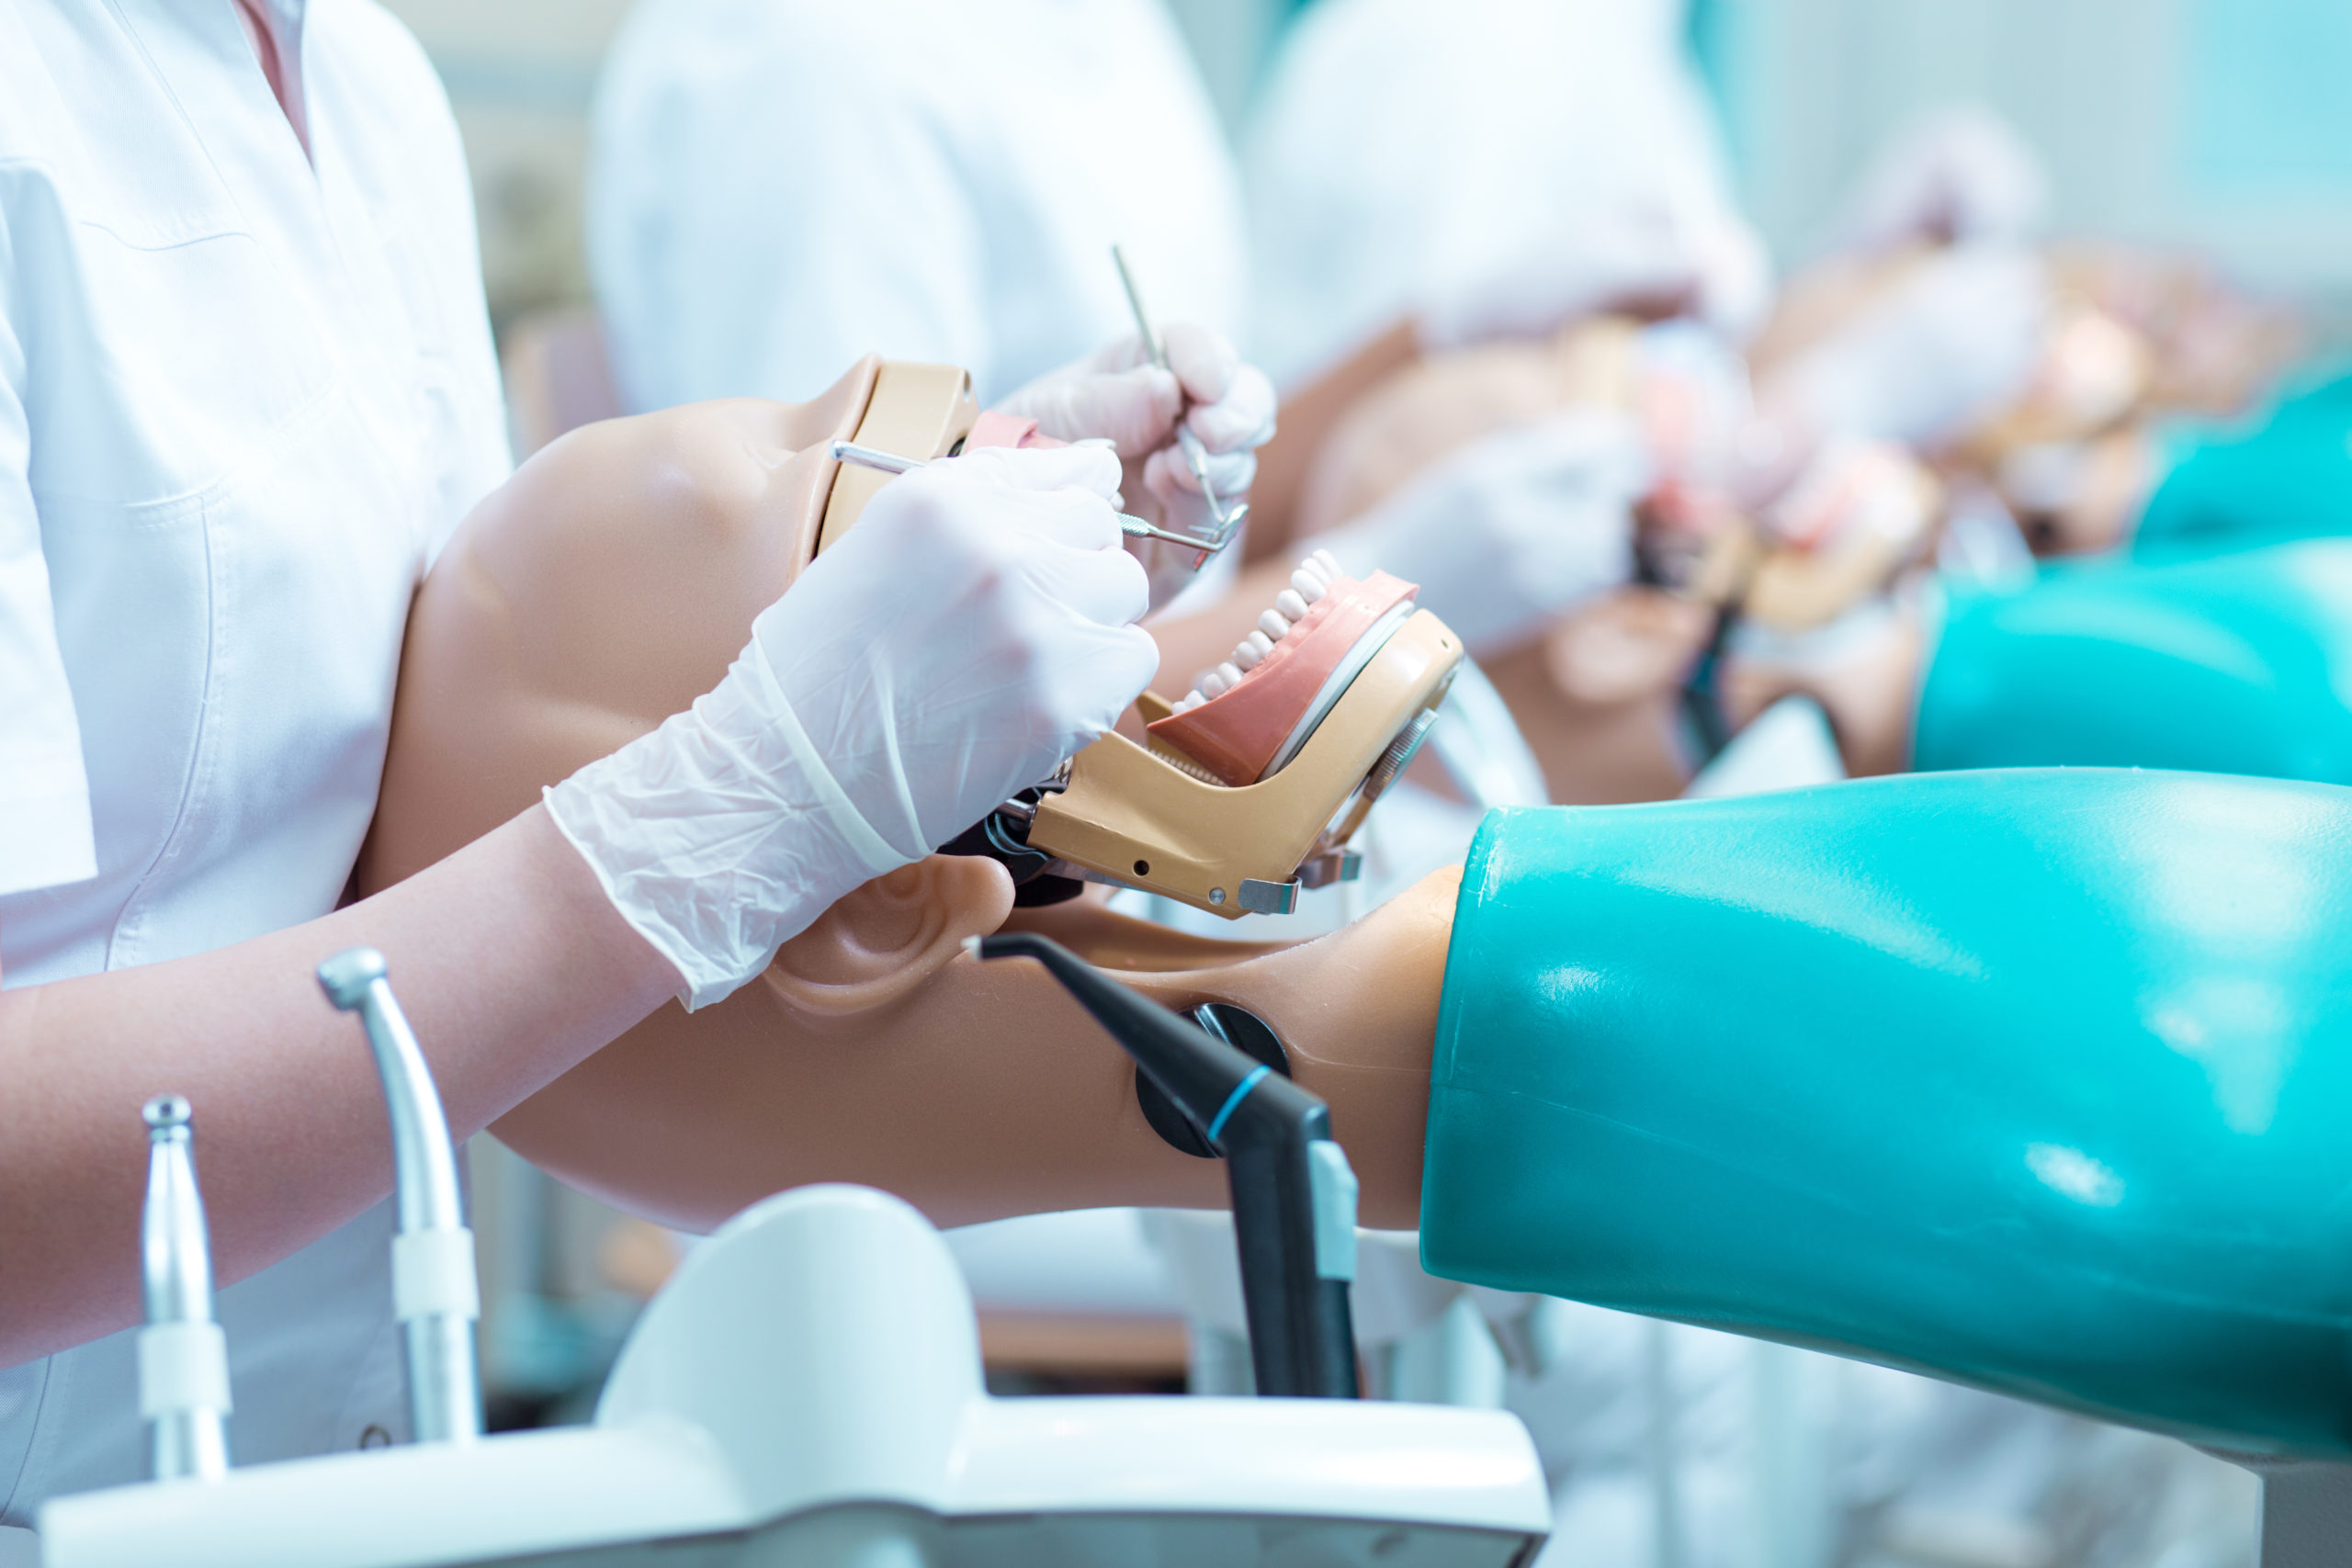 How to Become a Dentist in 2023: Training, Licensing, and Certification Requirements